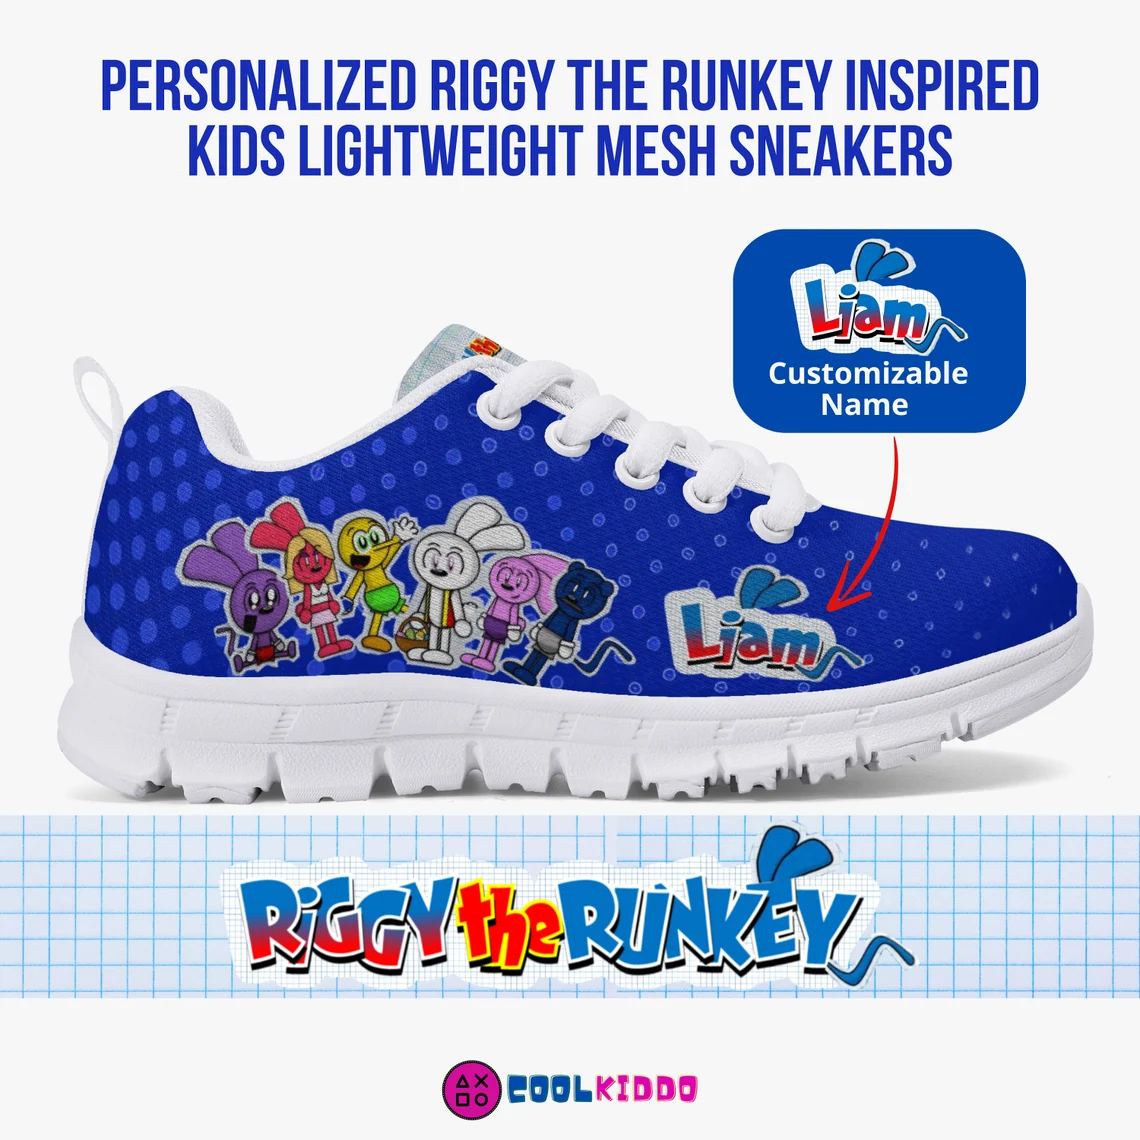 Personalized RiGGY the RUNKEY Lightweight Mesh Sneakers – Characters Printed Shoes for All Seasons Cool Kiddo 10